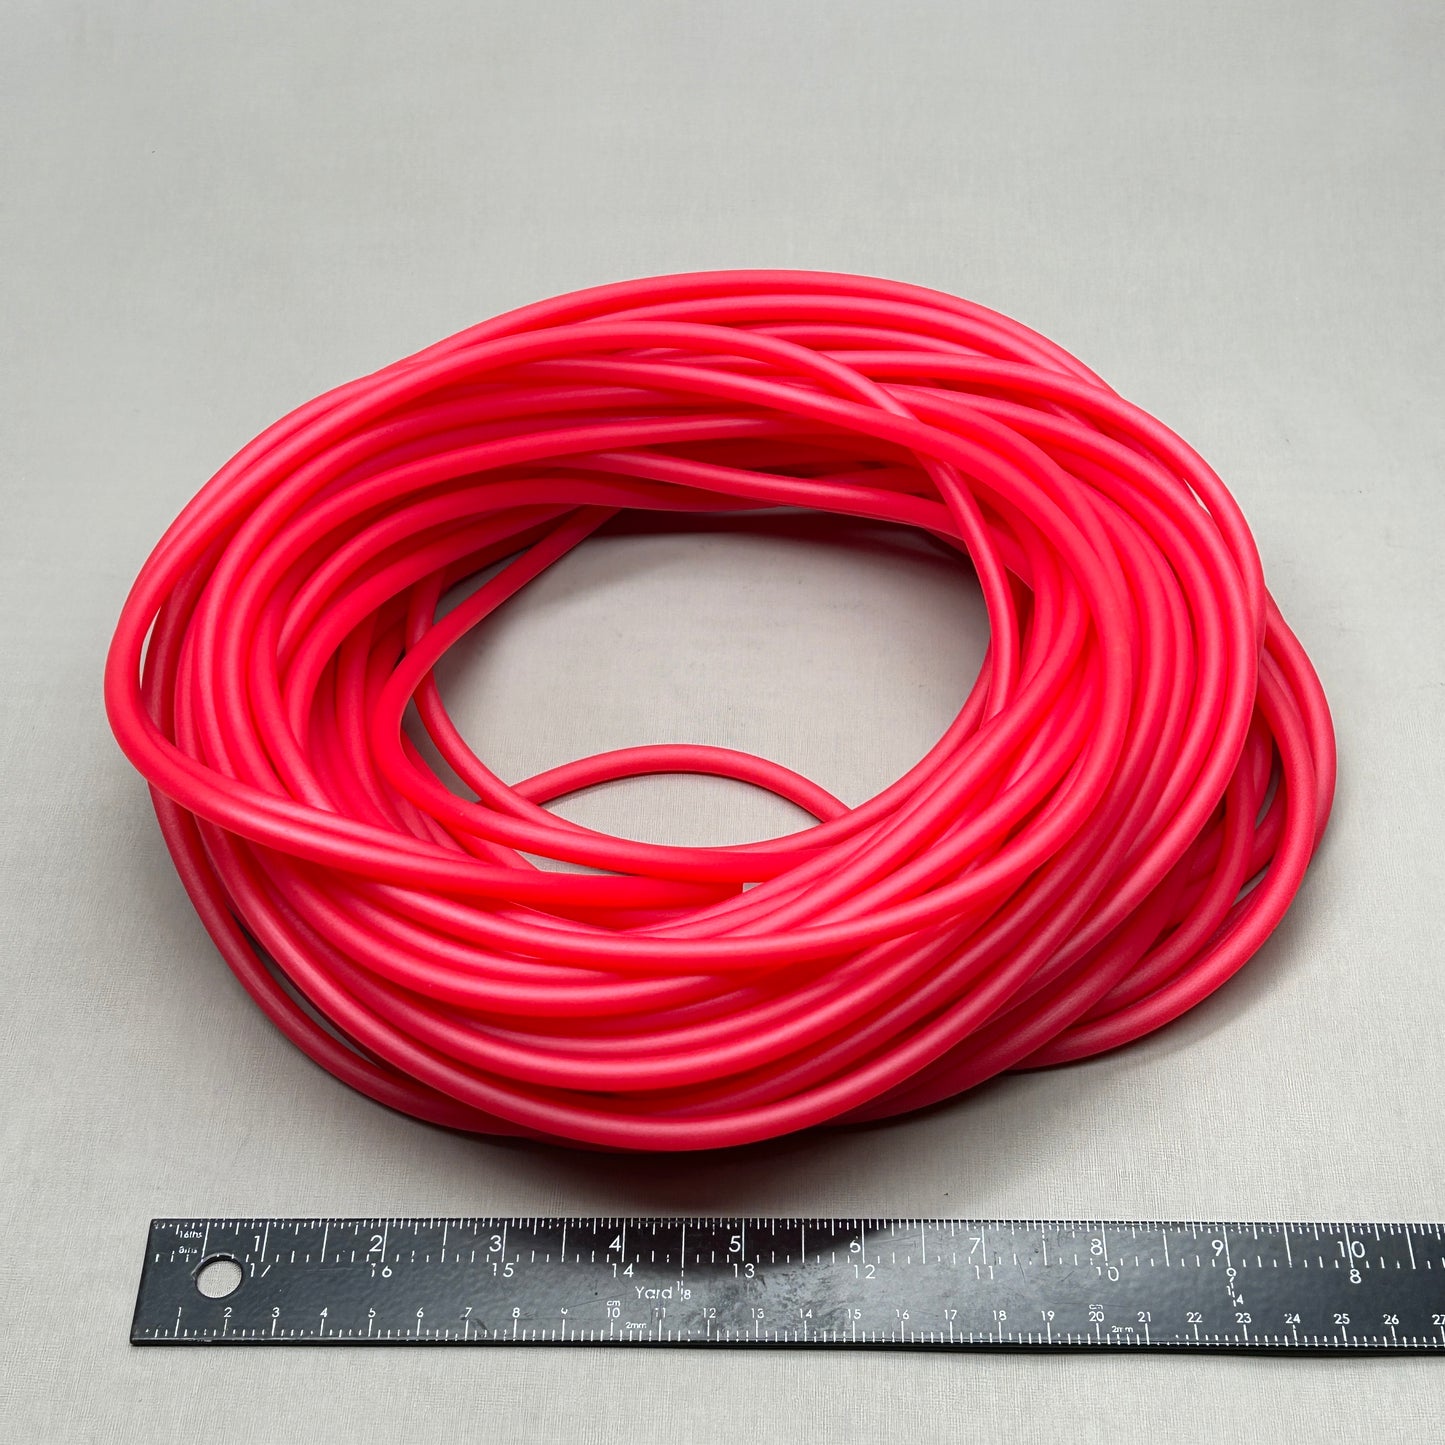 CANDO Latex-Free Exercise Tubing Light 100 ft Red (New)